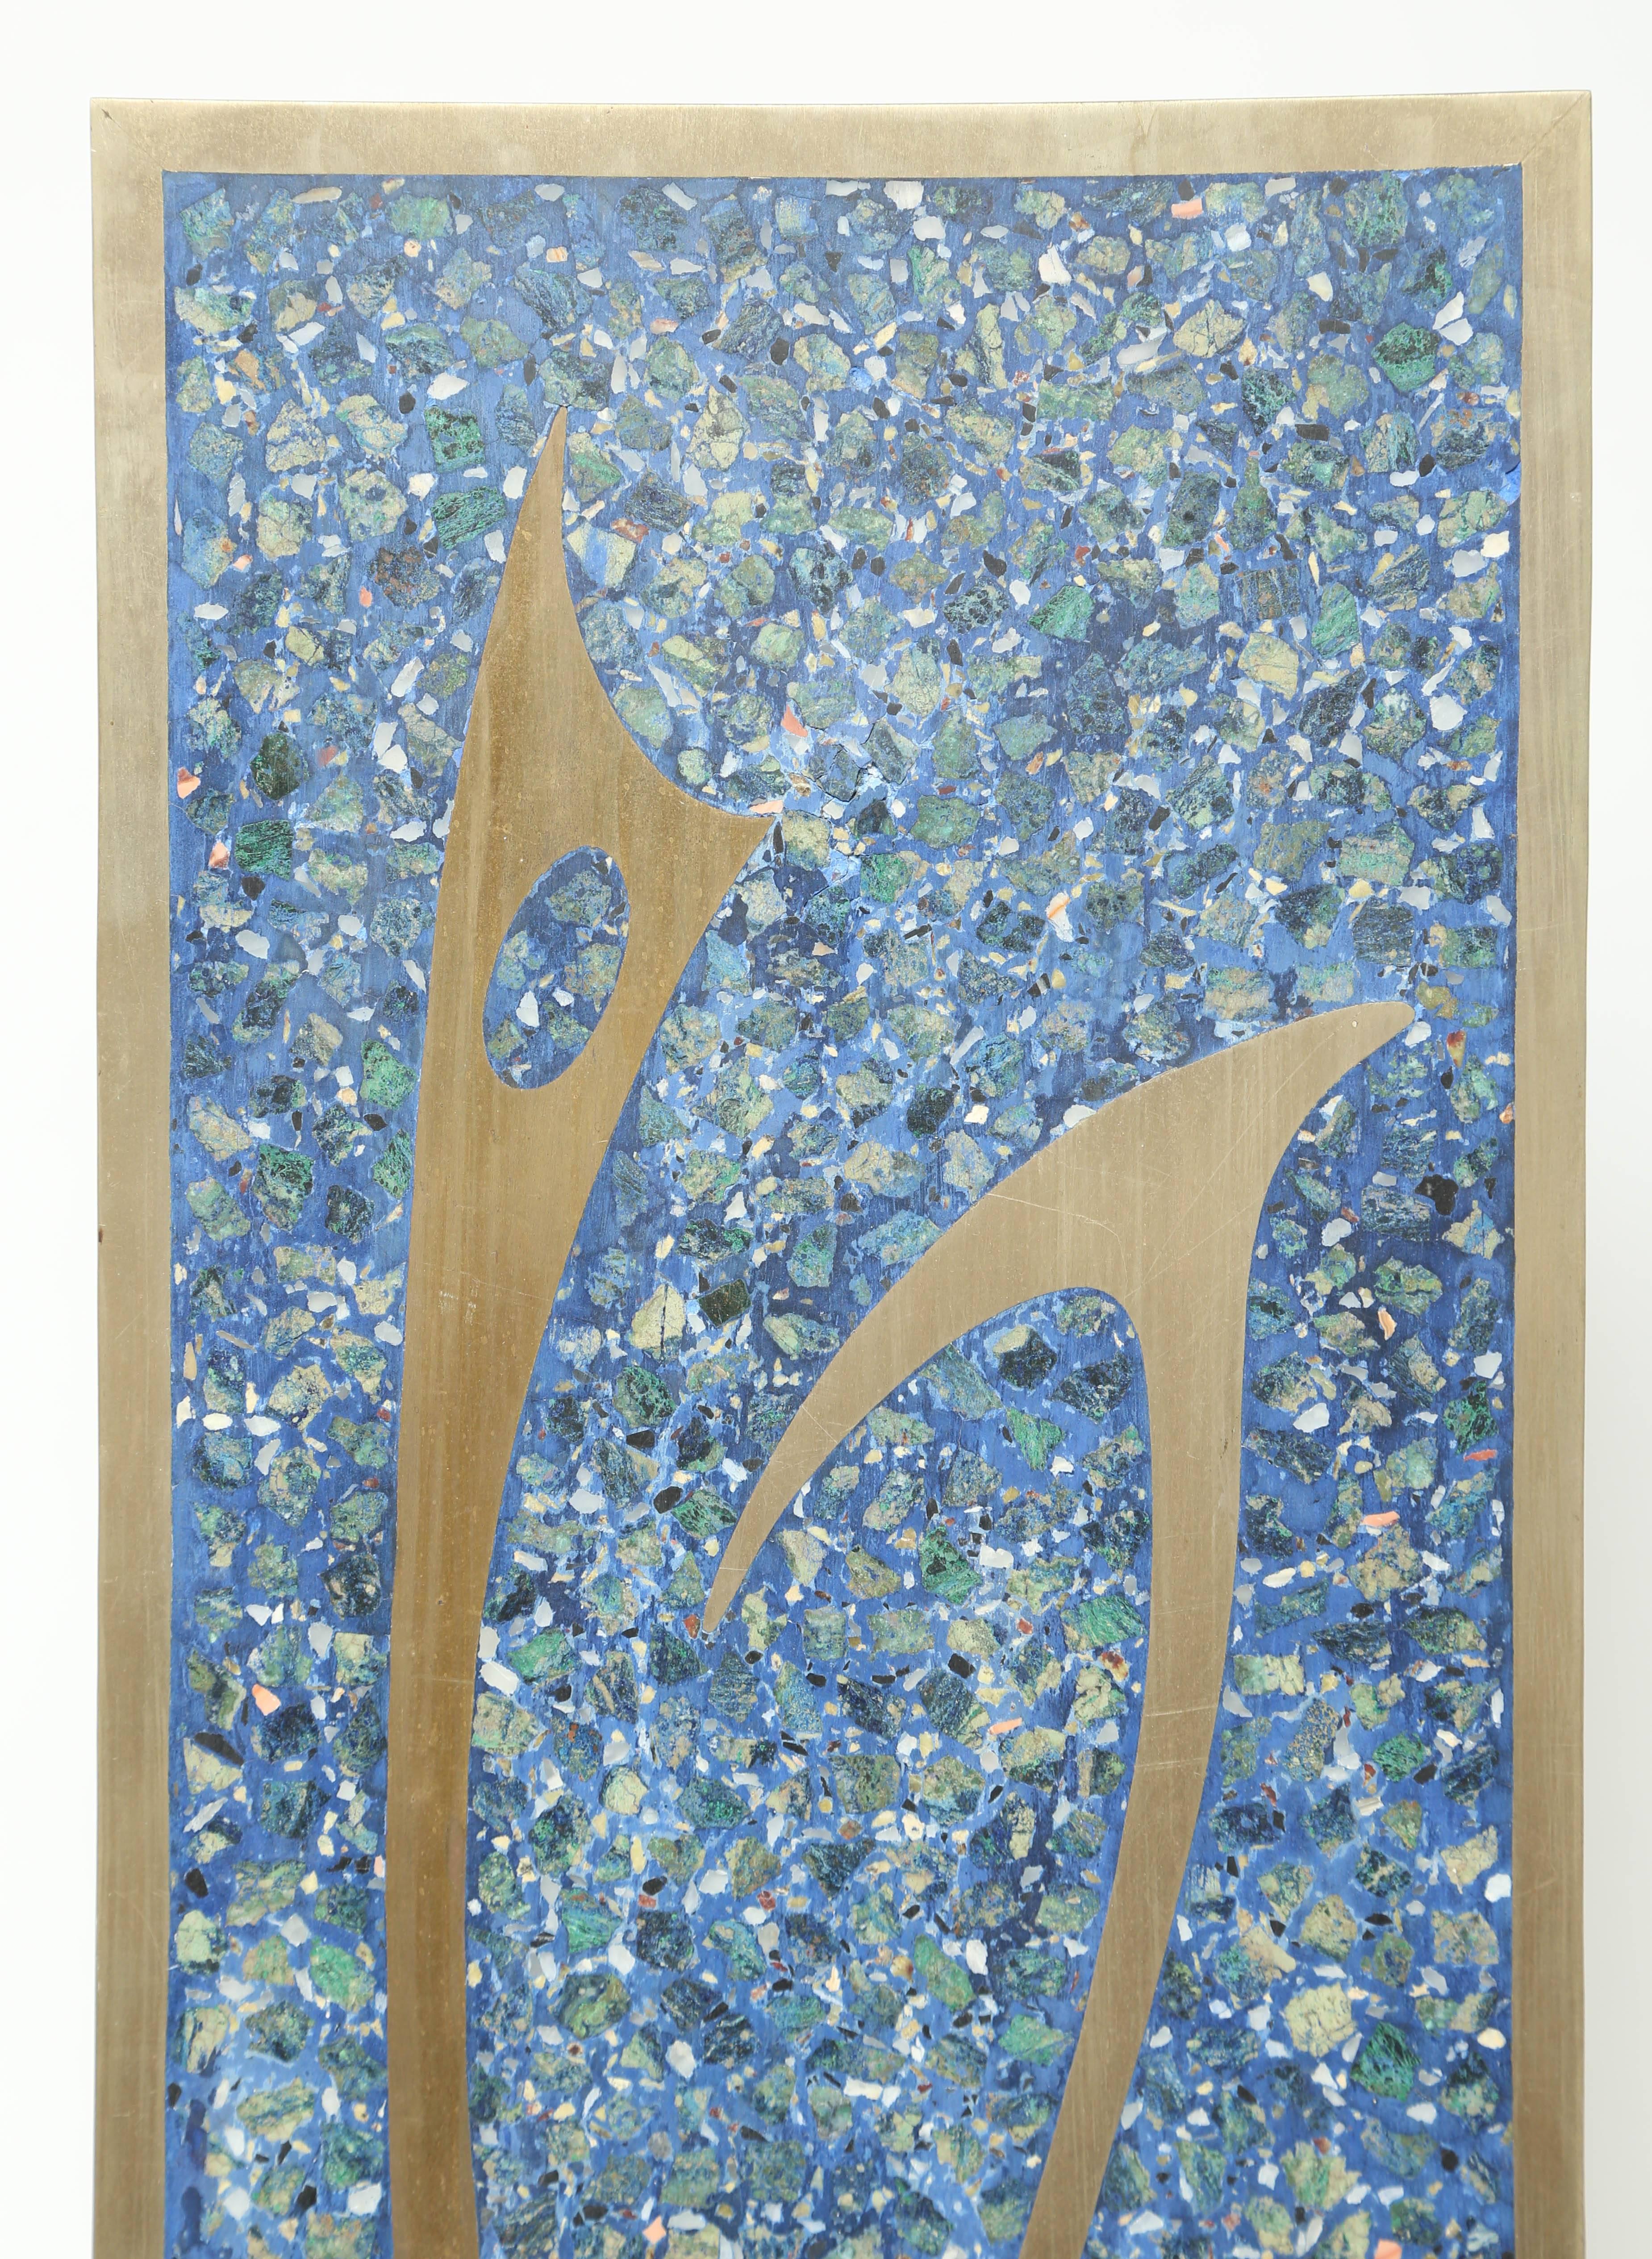 Large modern abstract wall sculpture designed and made by Sigi Pineda with a mosaic pattern background of natural stones including lapis lazuli and abstract cut-out of metal - bronze in two-tones and a bronzed framed border. Signature is done in